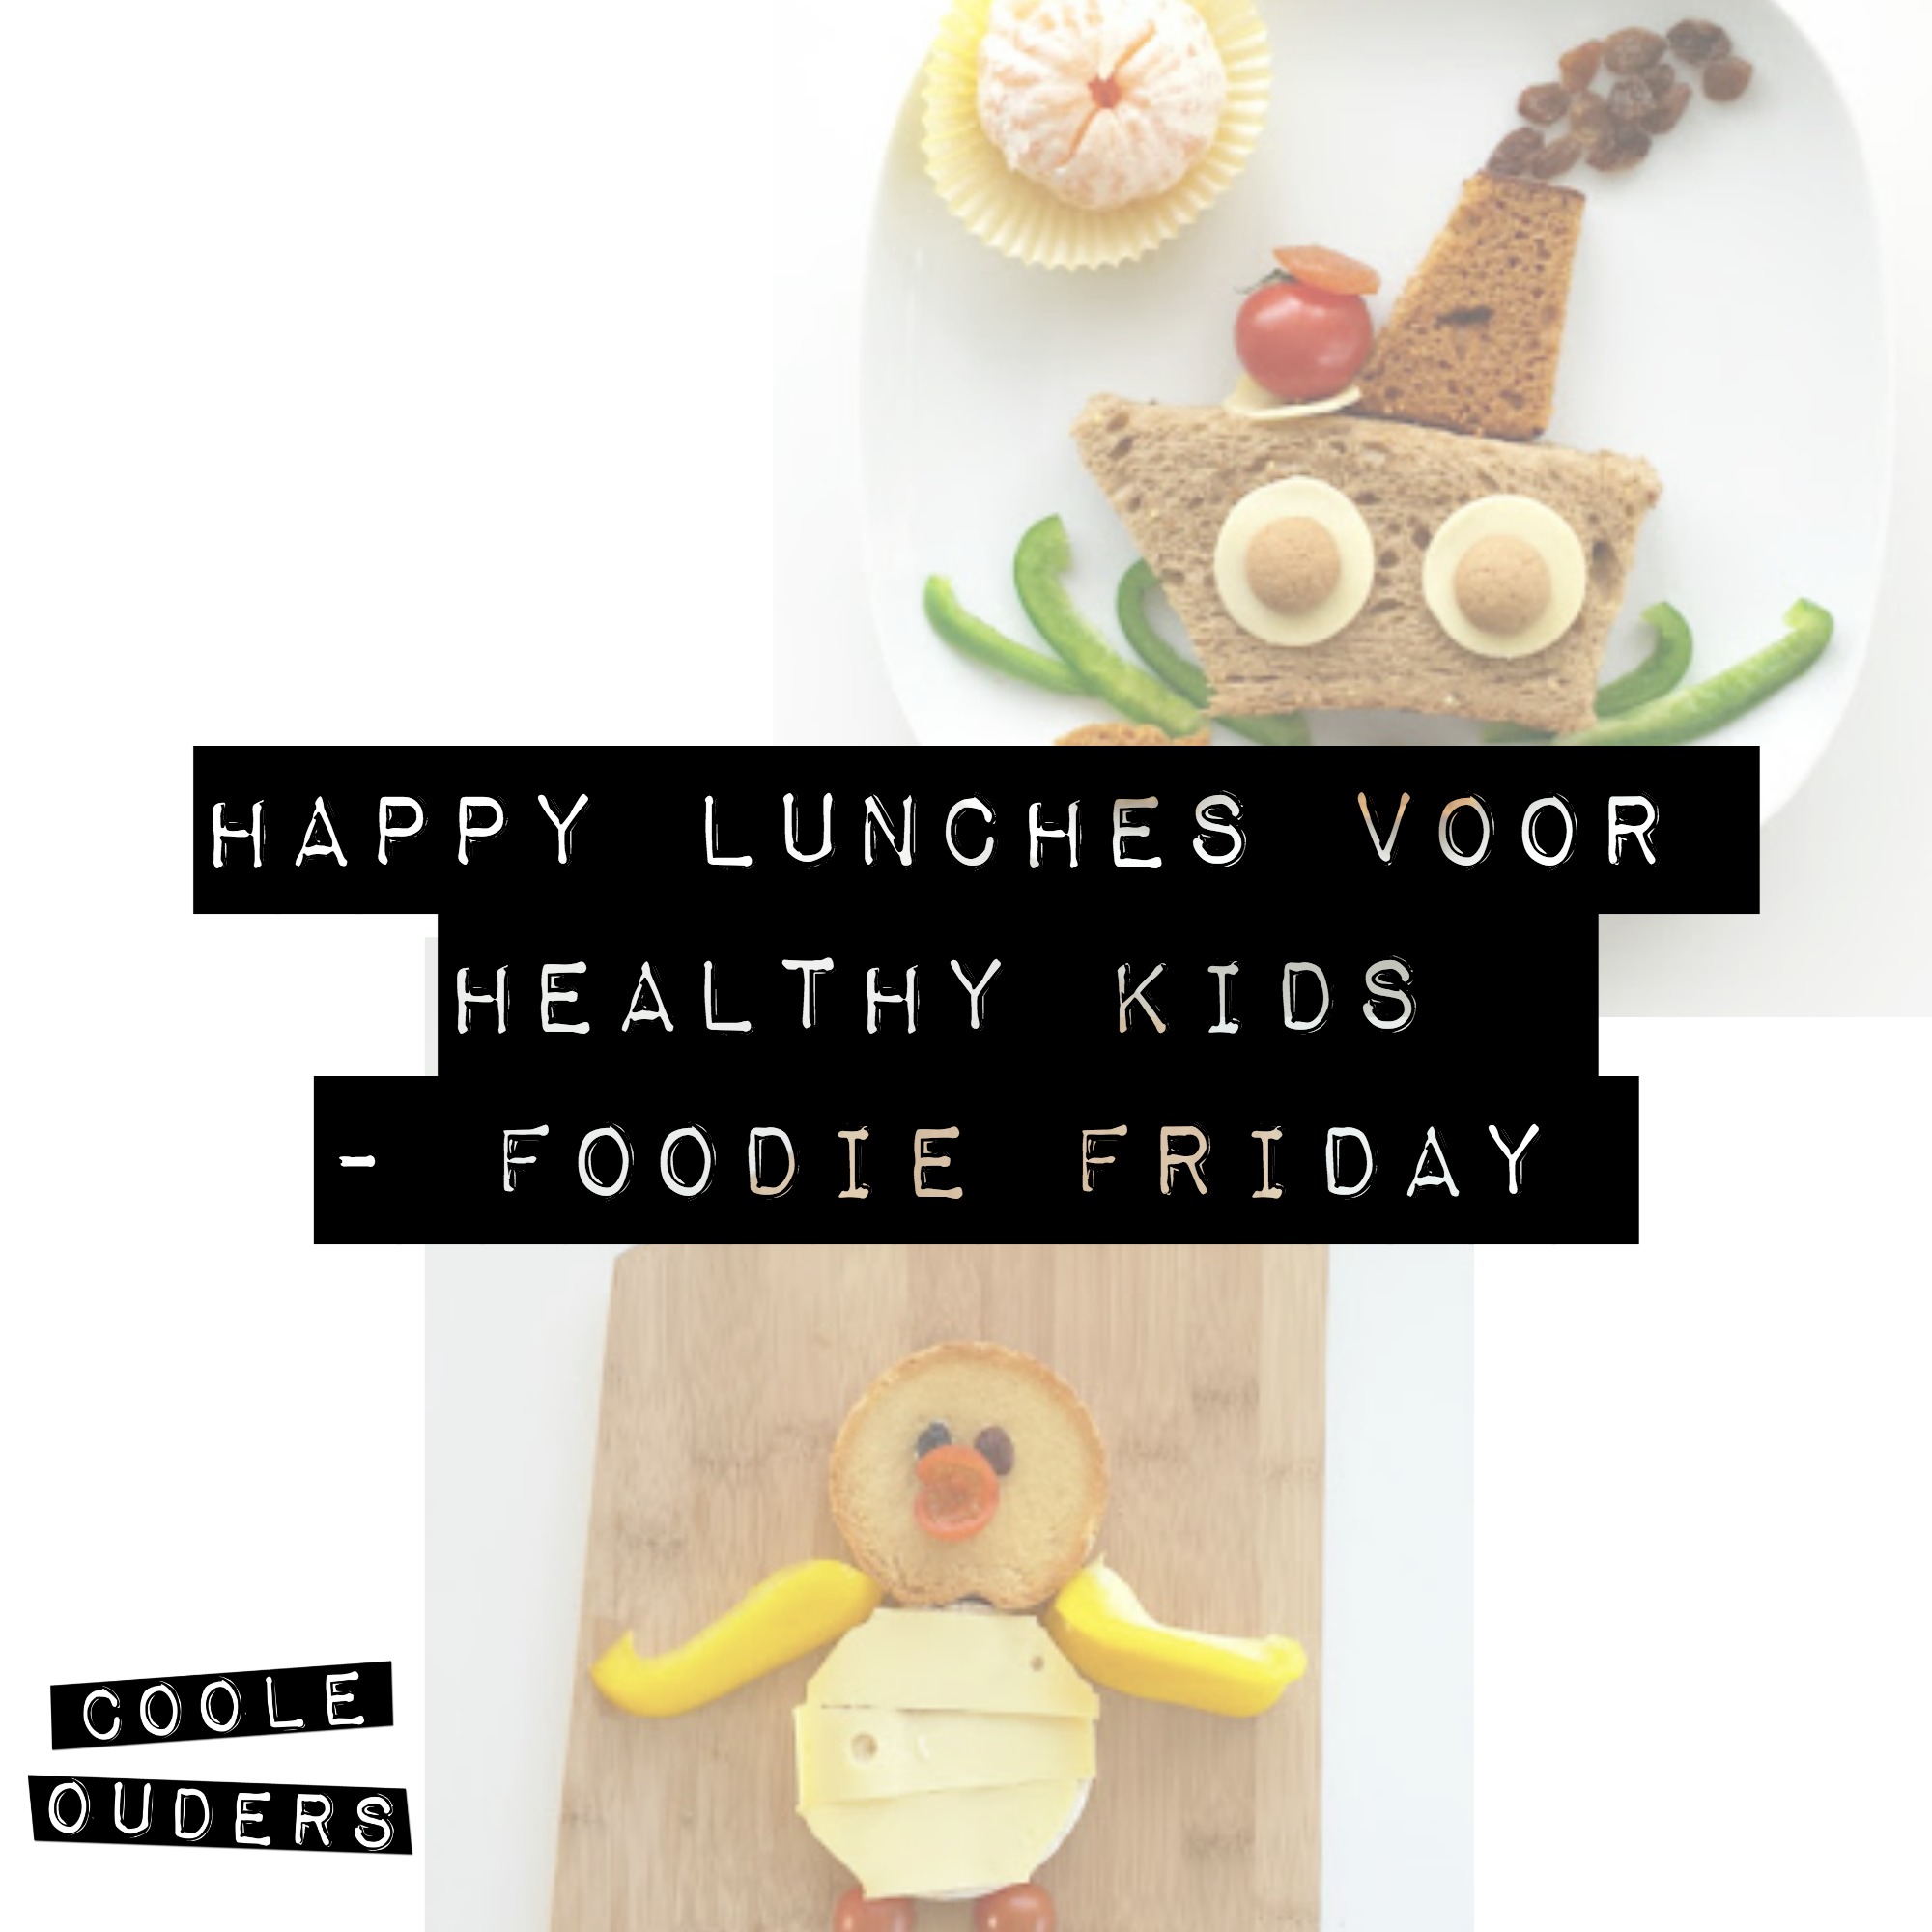 Happy lunches voor healthy kids – Foodie Friday